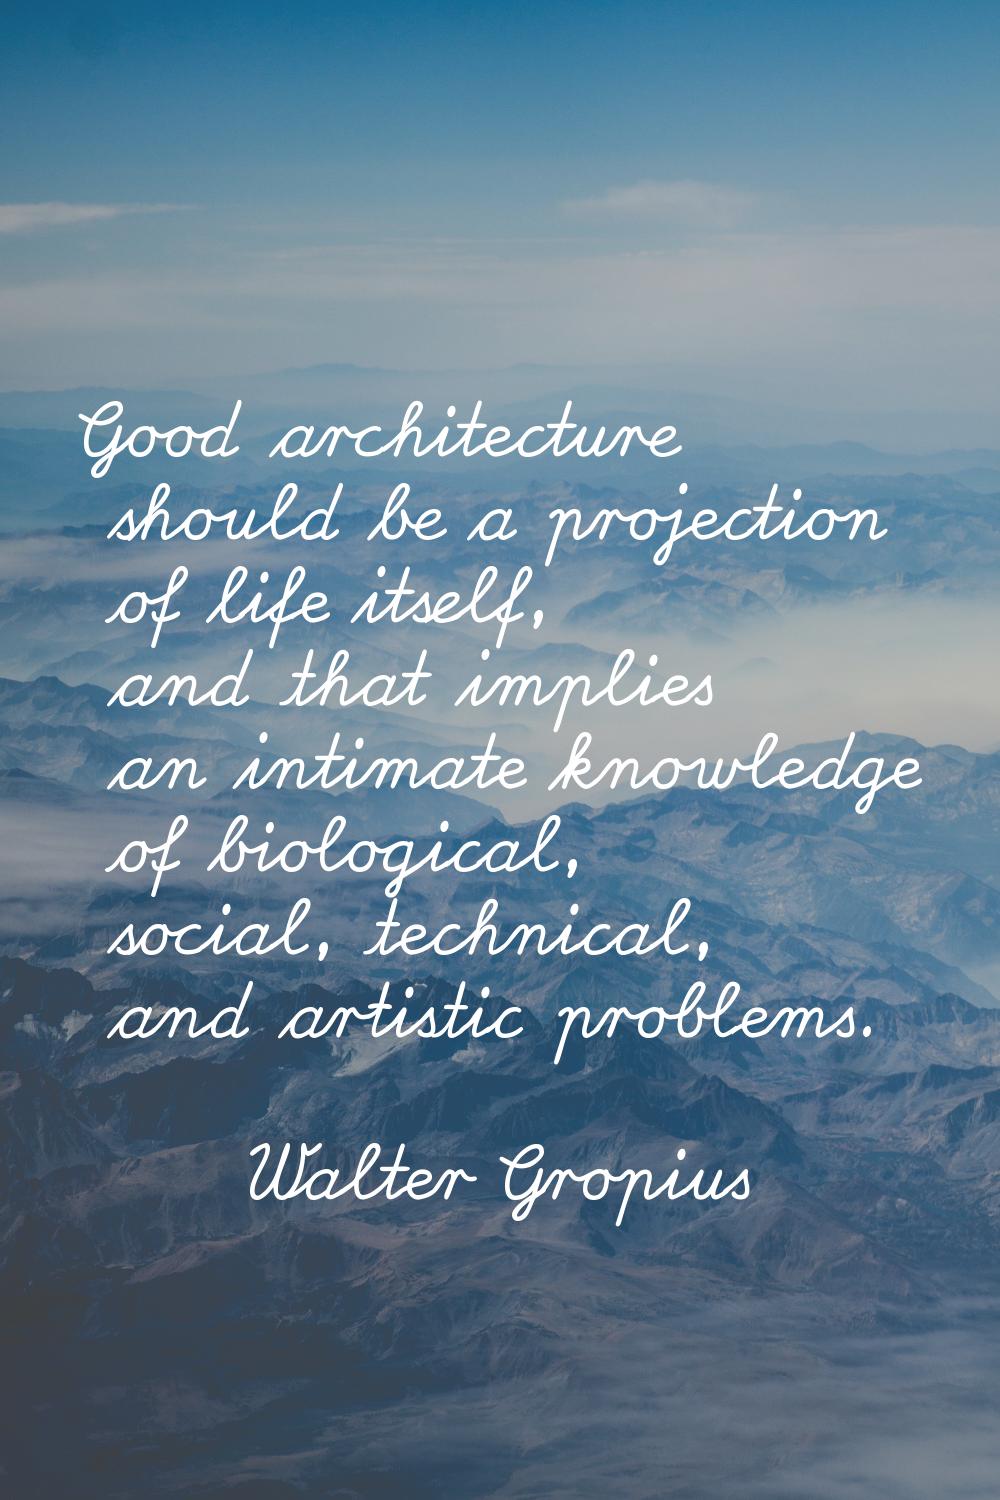 Good architecture should be a projection of life itself, and that implies an intimate knowledge of 